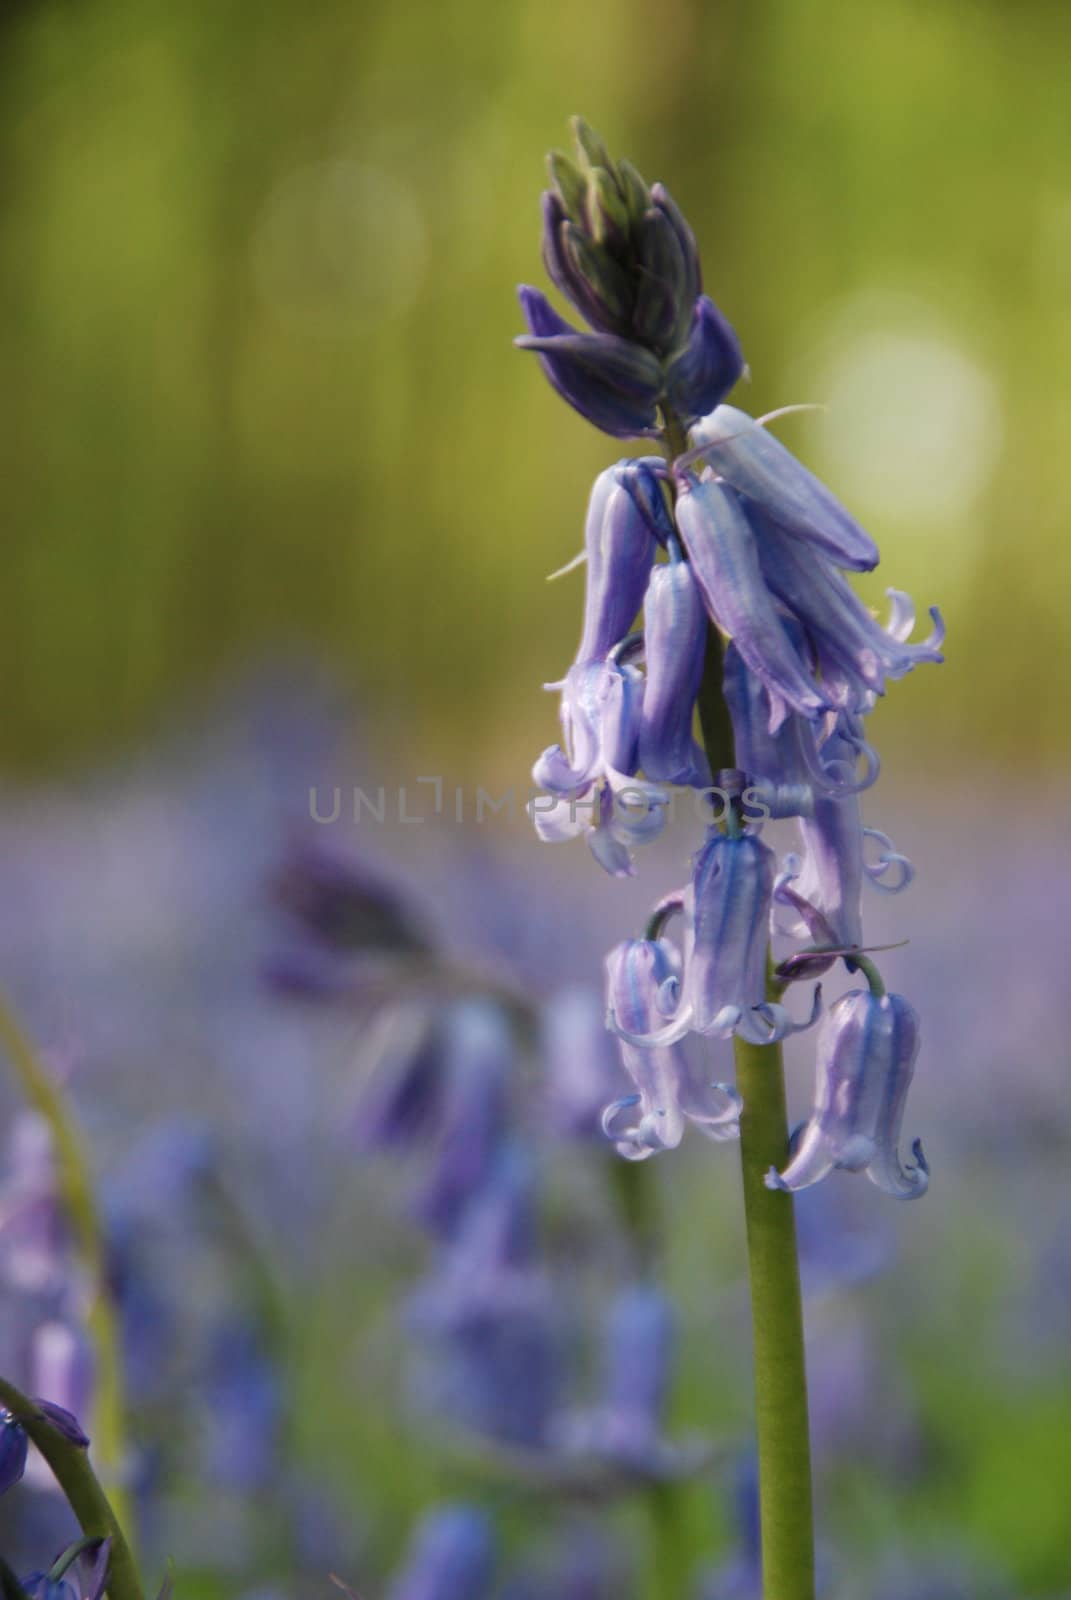 Just a Bluebell by Jez22